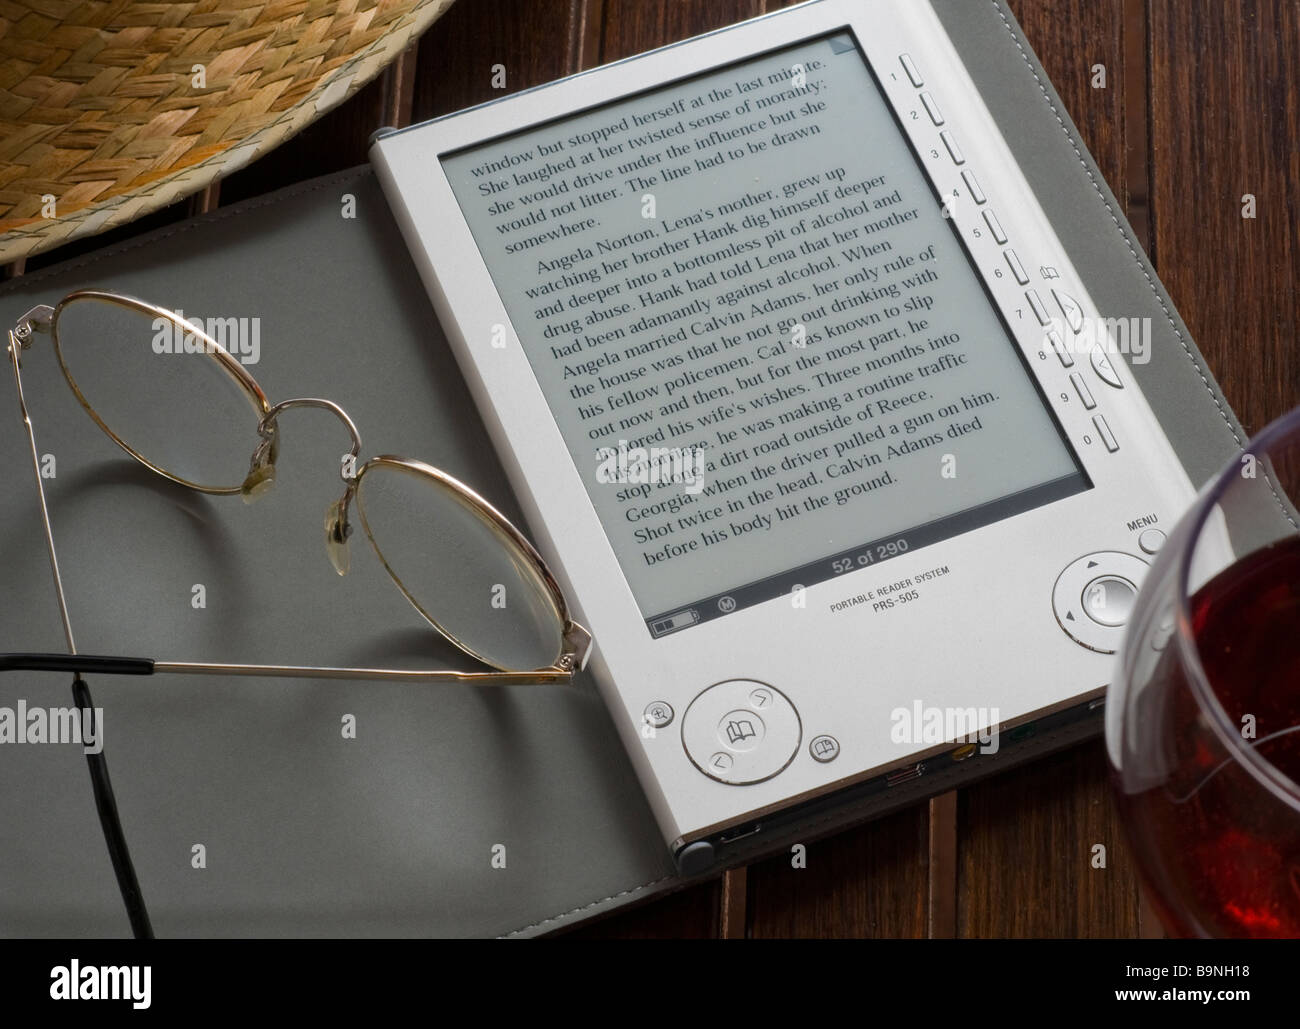 Sony e-Reader 2008 ,first generation  a digital electronic portable book storage and reading device on table with drink straw hat and glasses Stock Photo